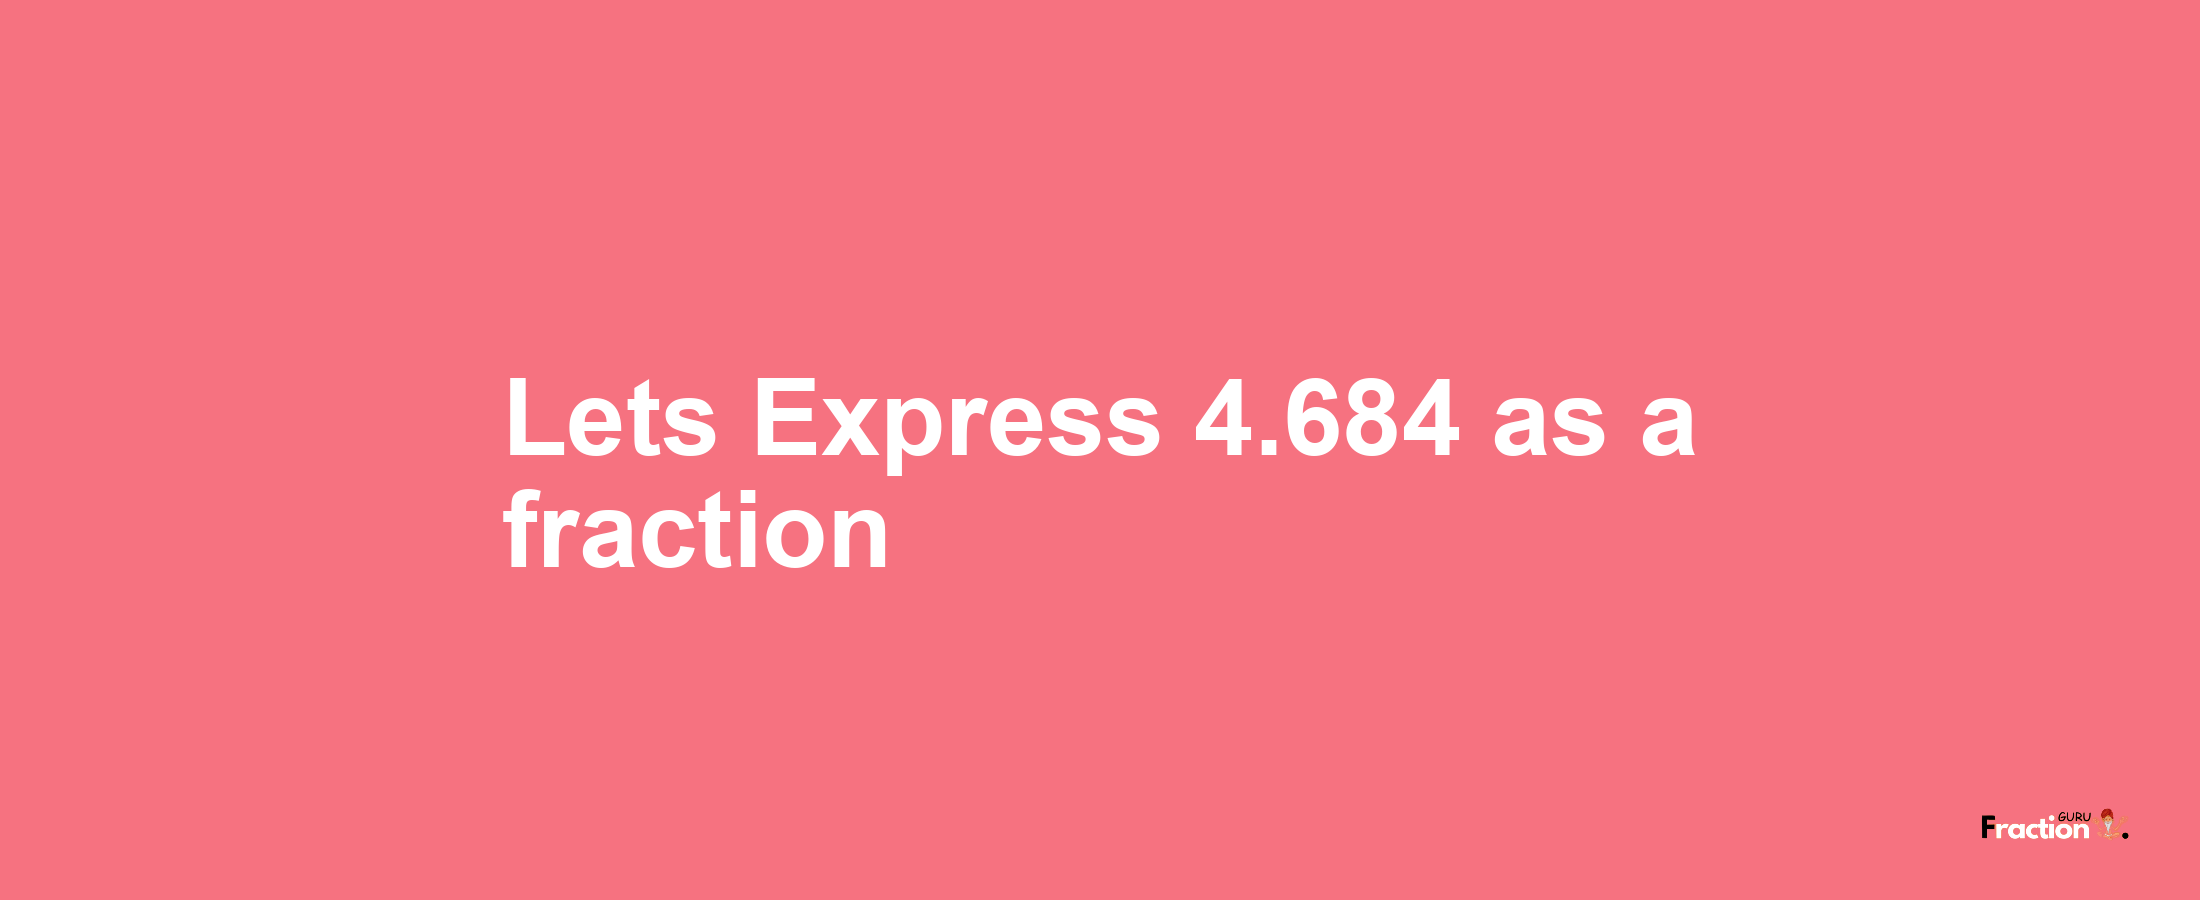 Lets Express 4.684 as afraction